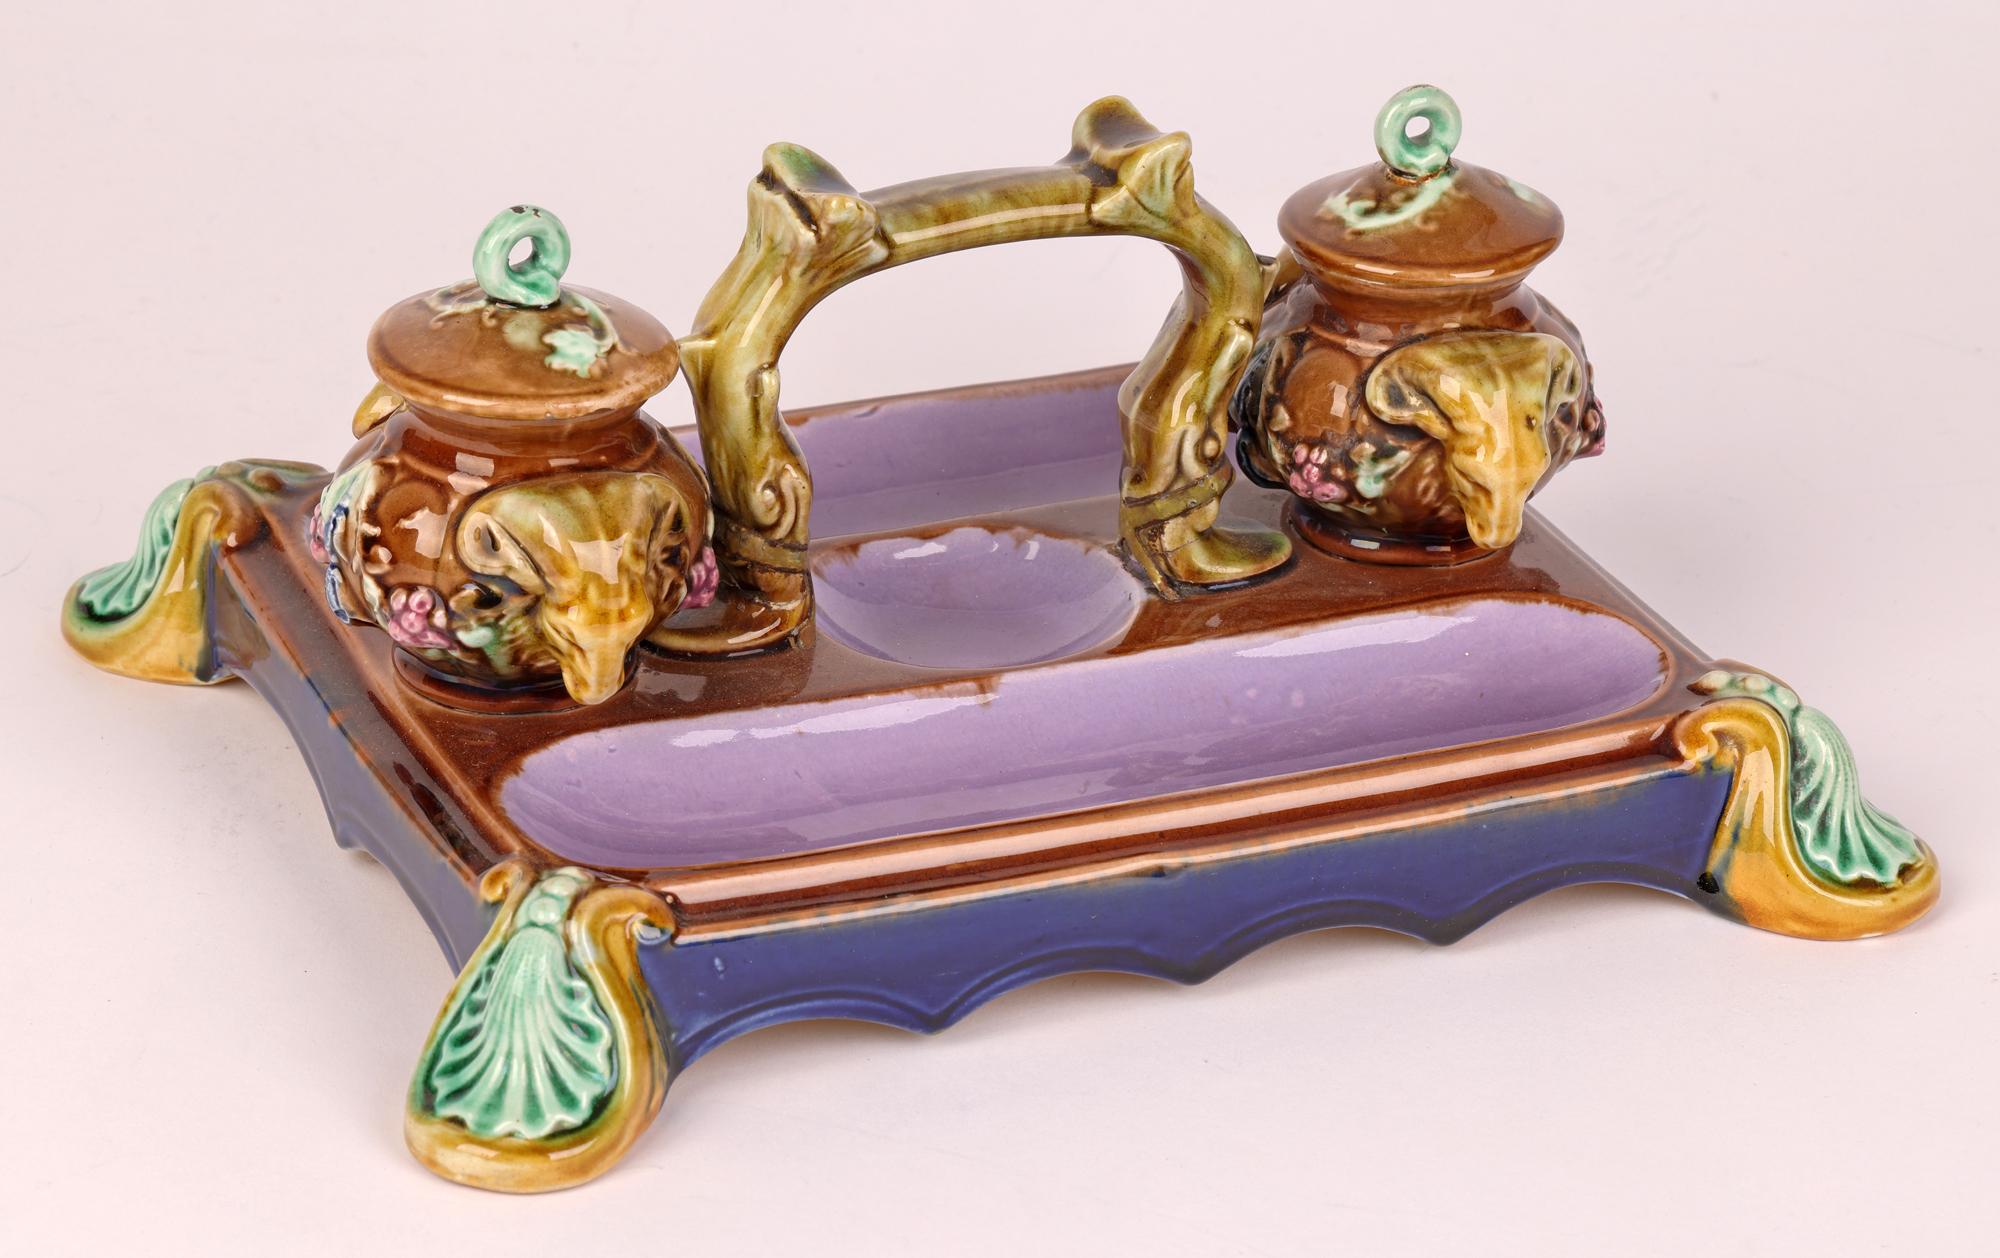 A very stylish English majolica pottery partners desk stand with inkwells with ram heads by renowned maker William Brownfield and dating from around 1870. The rectangular shaped desk stand sits raised on four scallop shell molded feet with a central